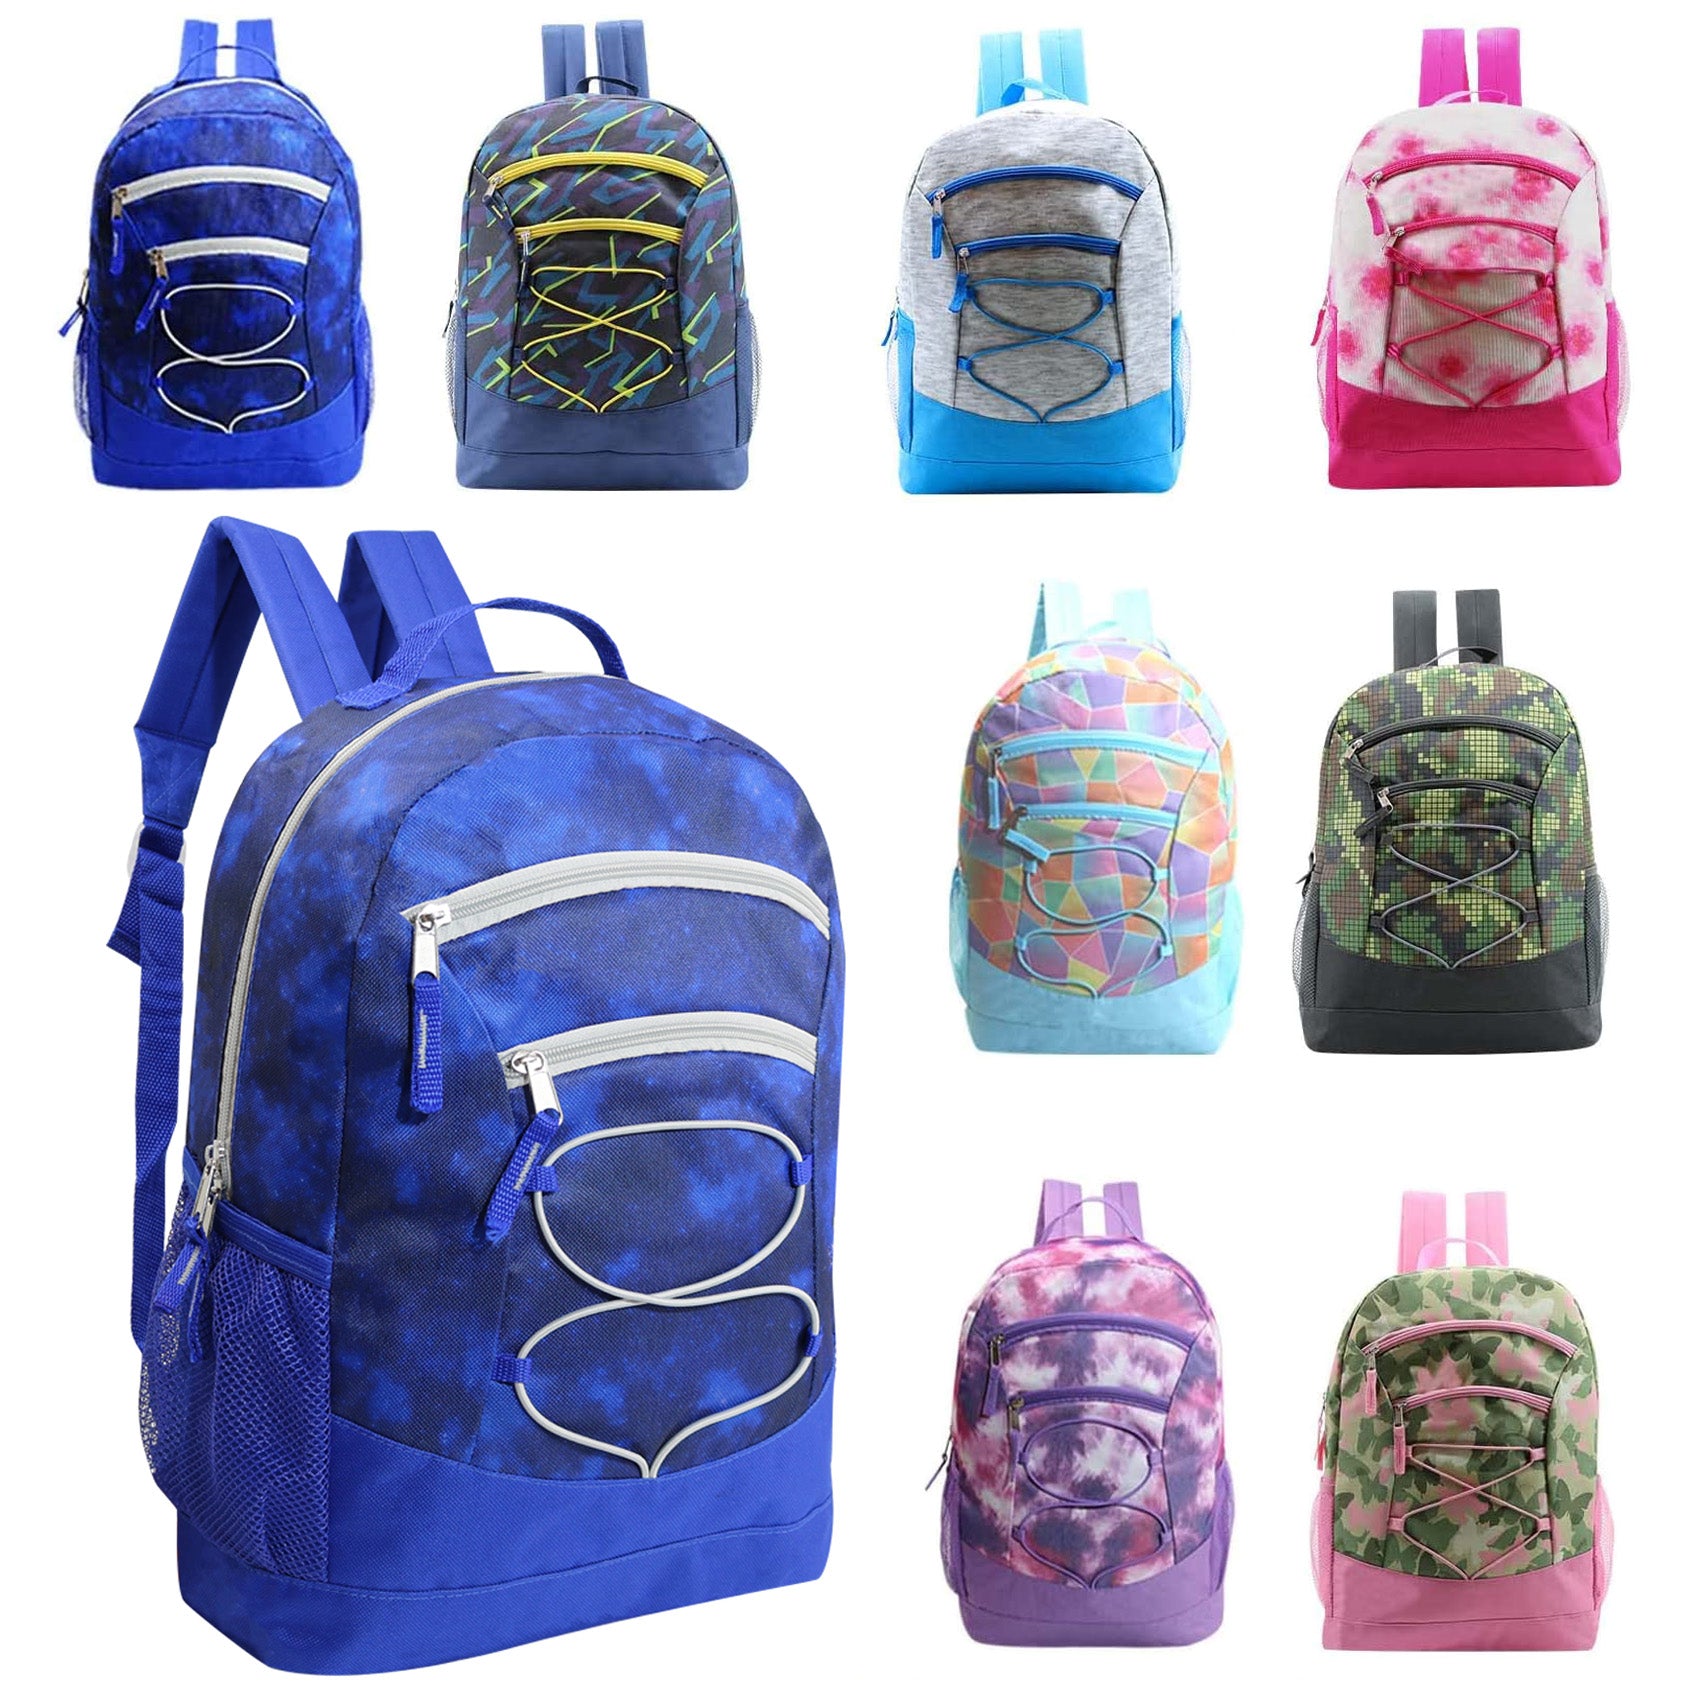 17 Inch Bulk Backpacks in Assorted Prints with School Supply Kits Wholesale - Kit of 12